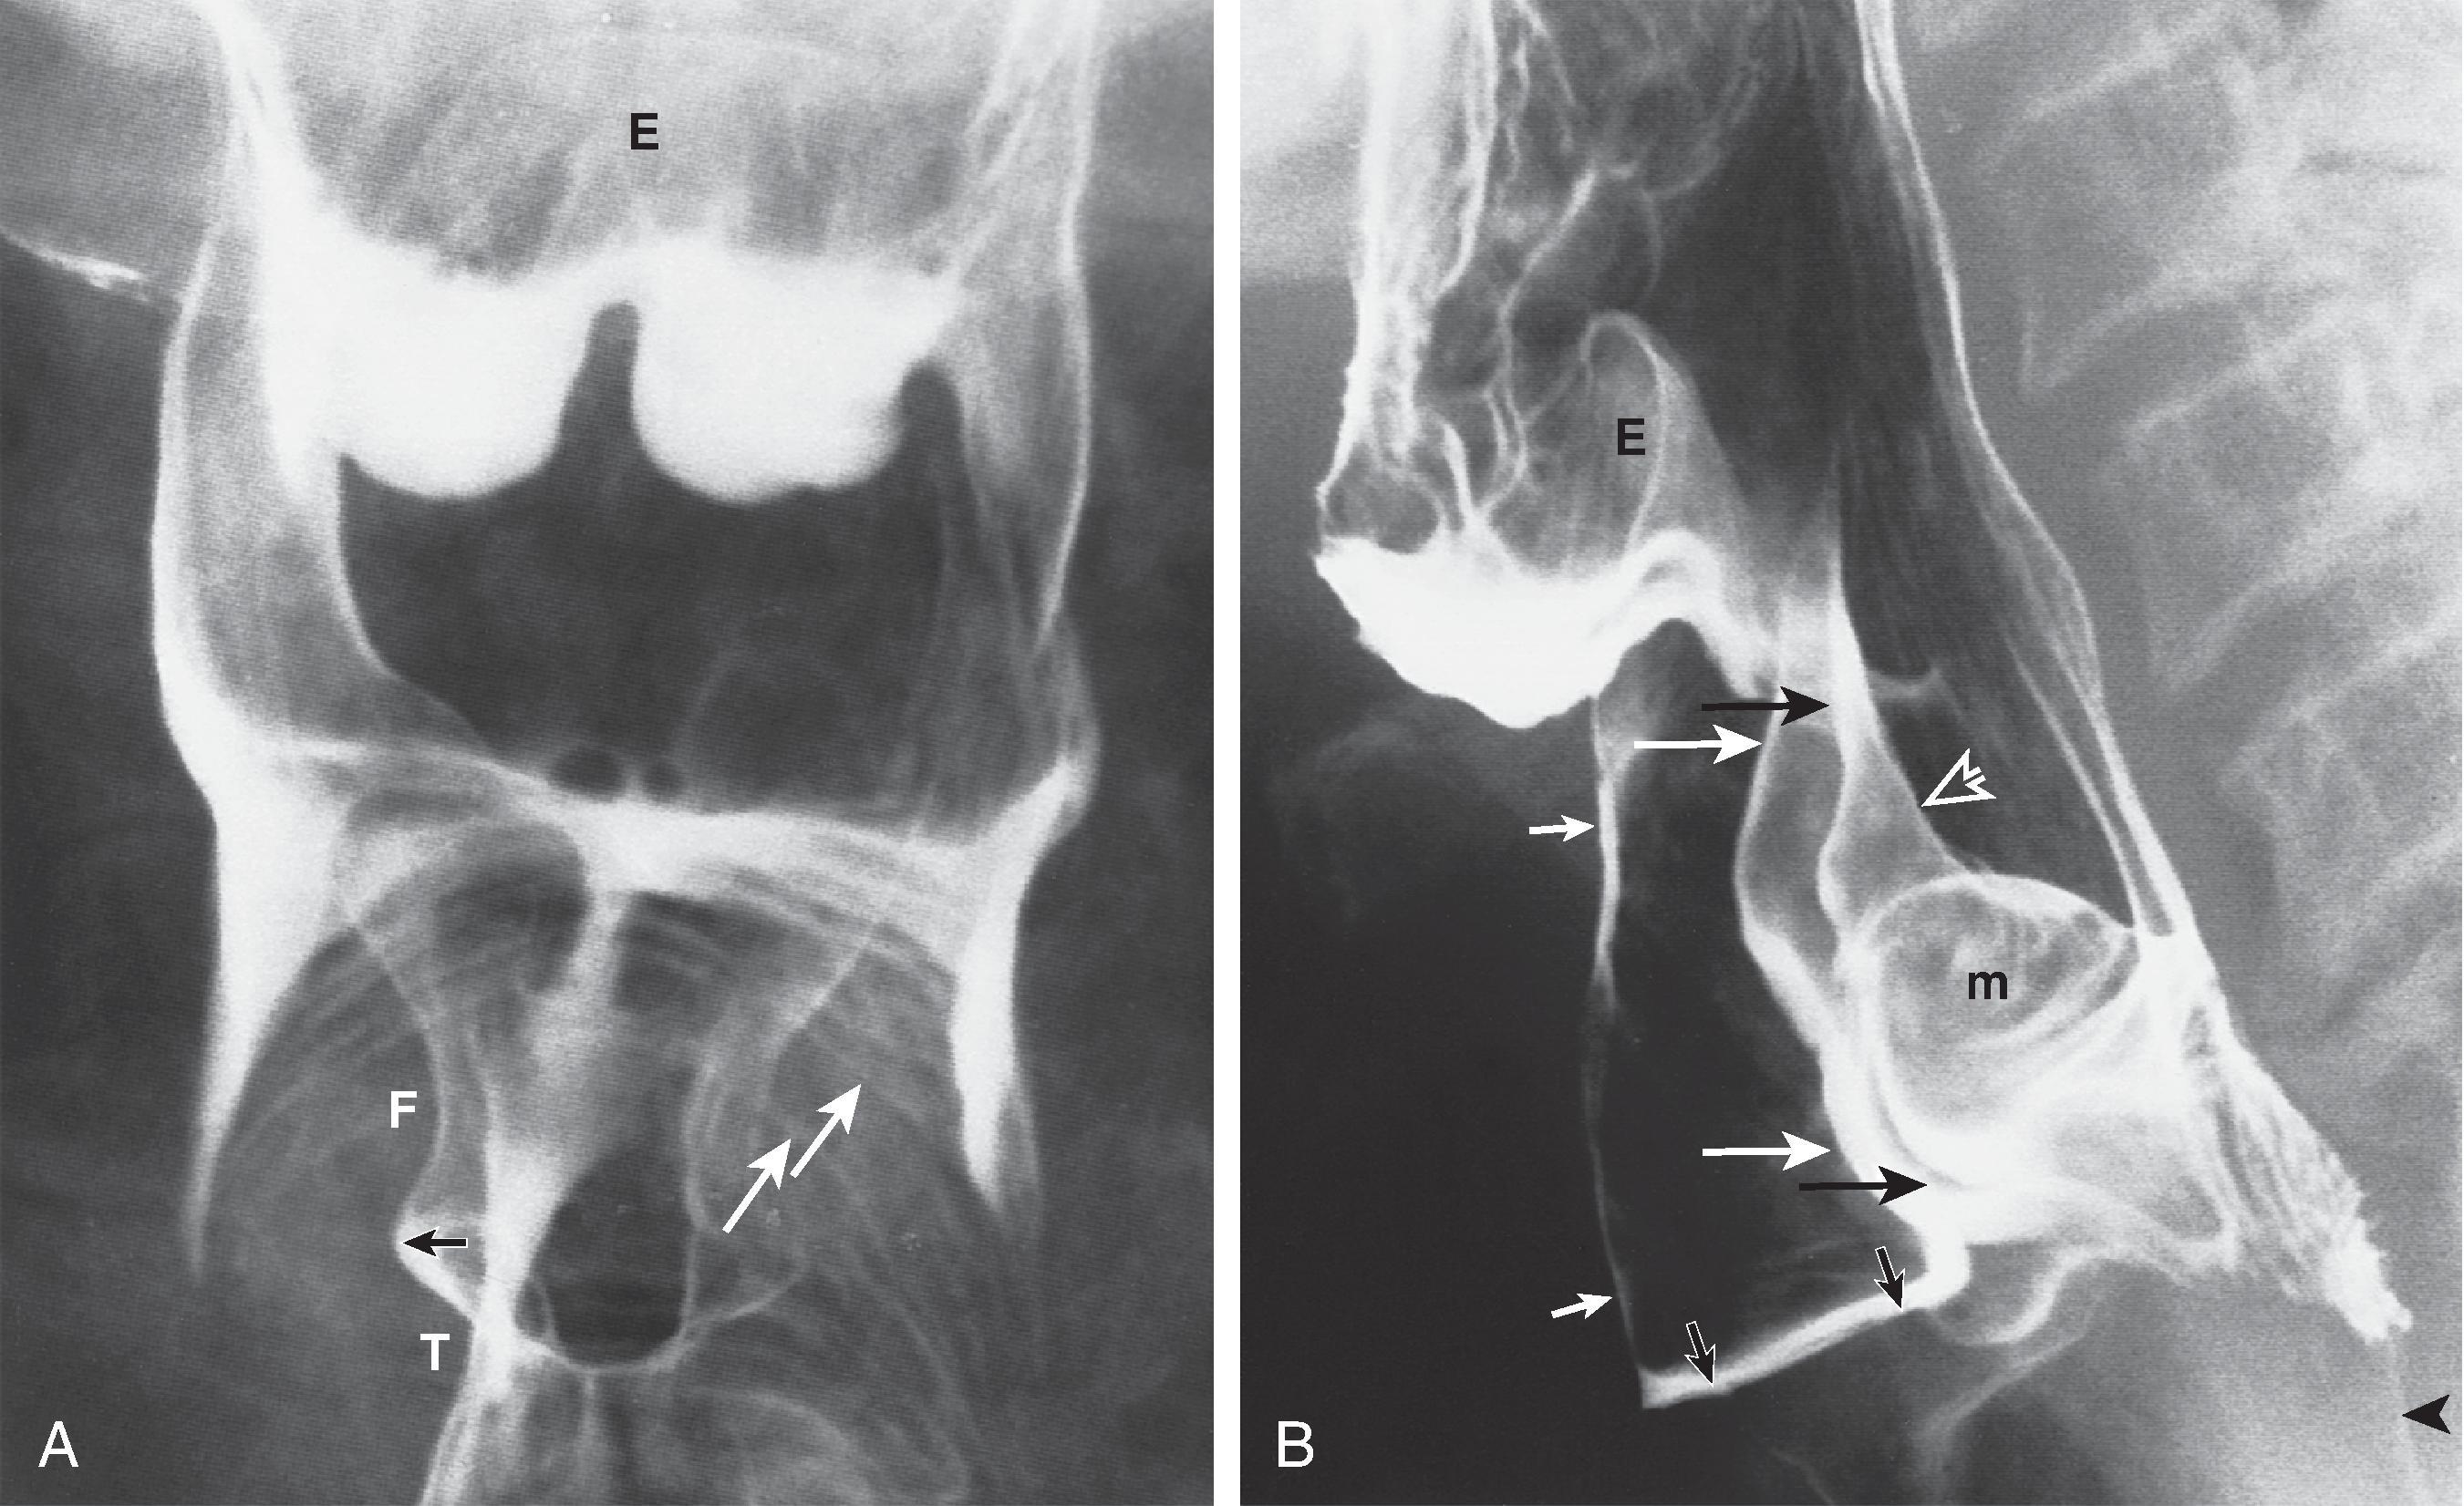 Fig. 4.2, Relationship of larynx to pharynx. (A) In a patient with laryngeal penetration, frontal view of the pharynx shows barium coating the false vocal cords (right false vocal cord [ F ]), true vocal cords (right true vocal cord [ T ]), and laryngeal ventricle (right laryngeal ventricle, black arrow ). As the larynx protrudes into the midhypopharynx, arcuate lines ( white arrows ) are formed. (B) Lateral view of the pharynx shows the relationship of the barium-coated laryngeal vestibule ( small white arrows ) to the laryngeal ventricle ( small black arrows ). Note the angle of the laryngeal ventricle atop the true vocal cords and tilt of the true vocal cords. The anterior walls of the right piriform sinus ( large white arrows ) and left piriform sinus ( arge black arrows ) are seen as anteriorly convex lines. The mucosa ( m ) overlying the muscular process of the arytenoid cartilages lies below the aryepiglottic fold ( open arrow ). The lower hypopharynx ( arrowhead ) is closed at rest. E, epiglottis. (B, From Rubesin SE, Glick SN. The tailored double-contrast pharyngogram. Crit Rev Diagn Imaging. 1988;28:133–179.)